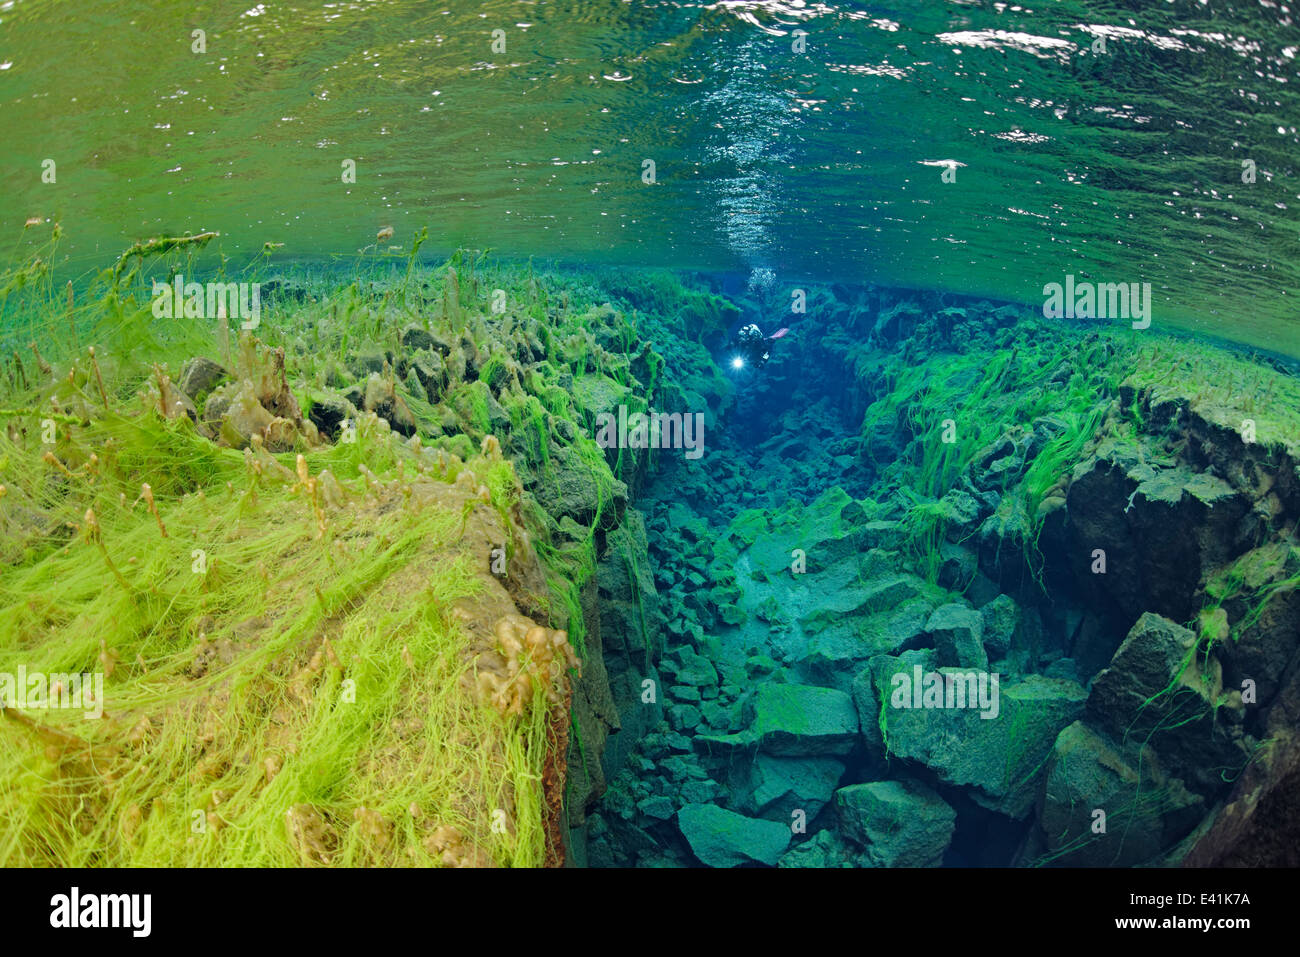 Silfra, Silfra - the freshwater fissure between the continents, Silfra, thingvellir Nationalpark, Iceland Stock Photo